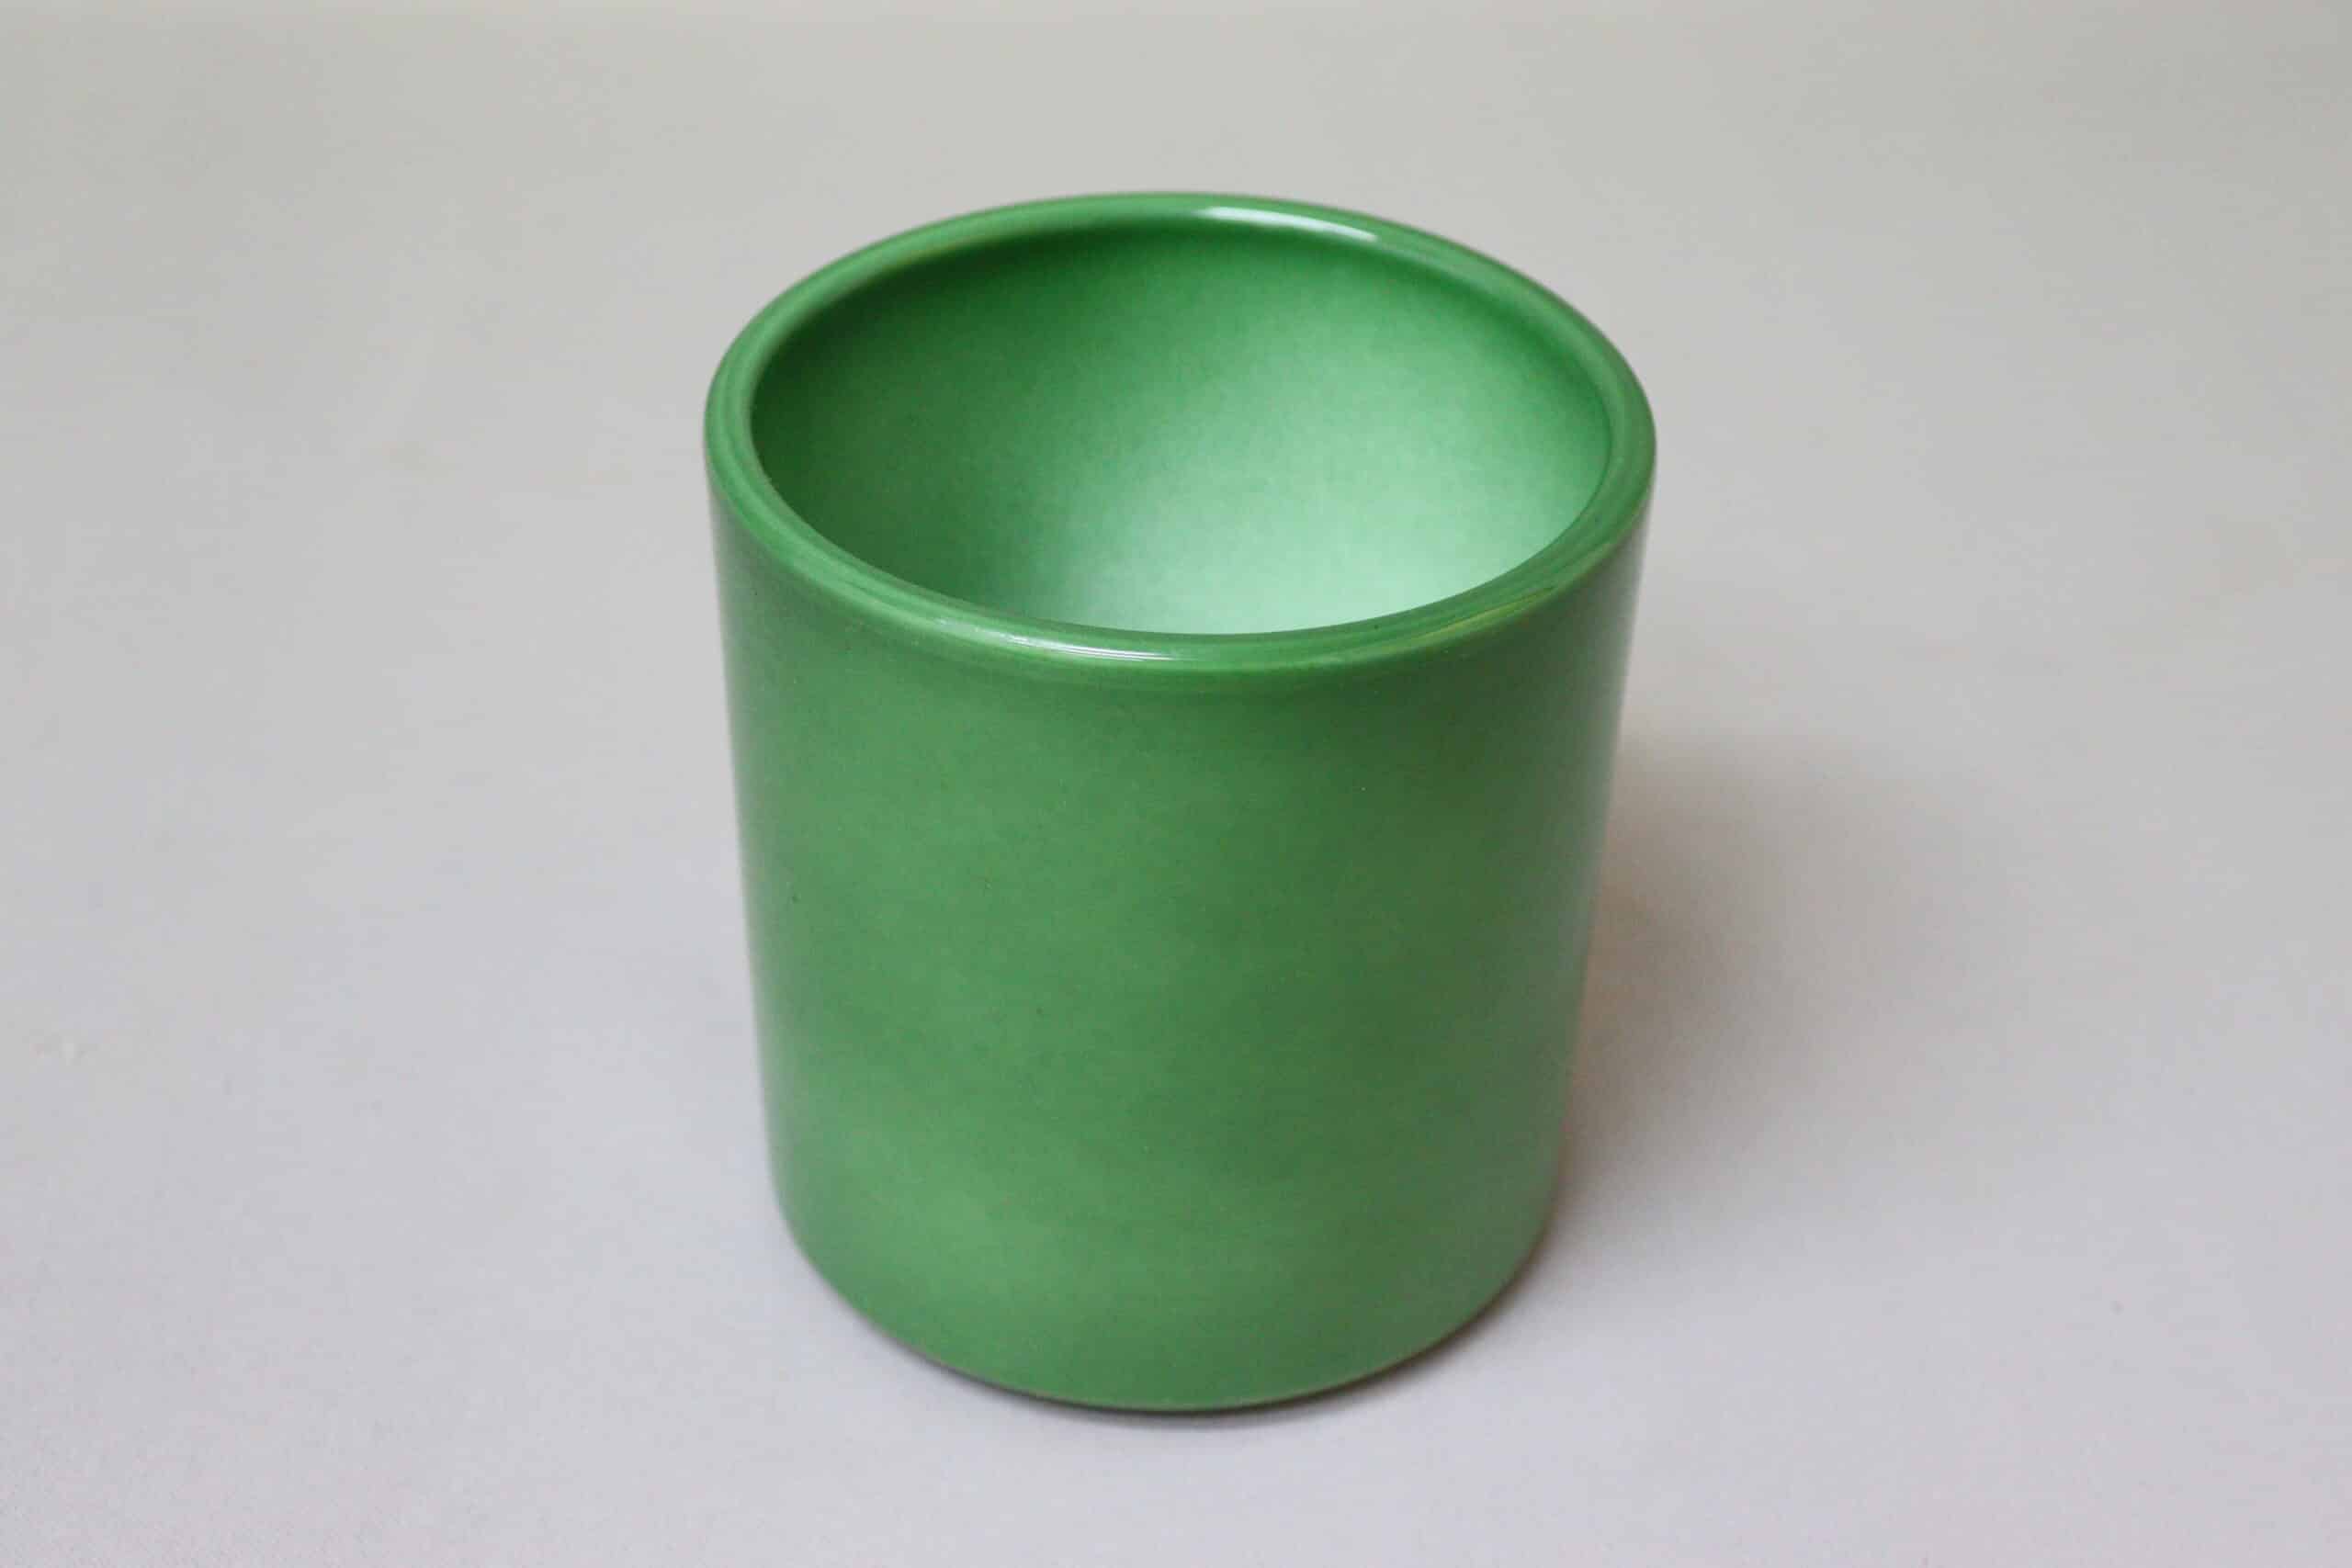 Bright green pot cover with smooth sides for potted plants.